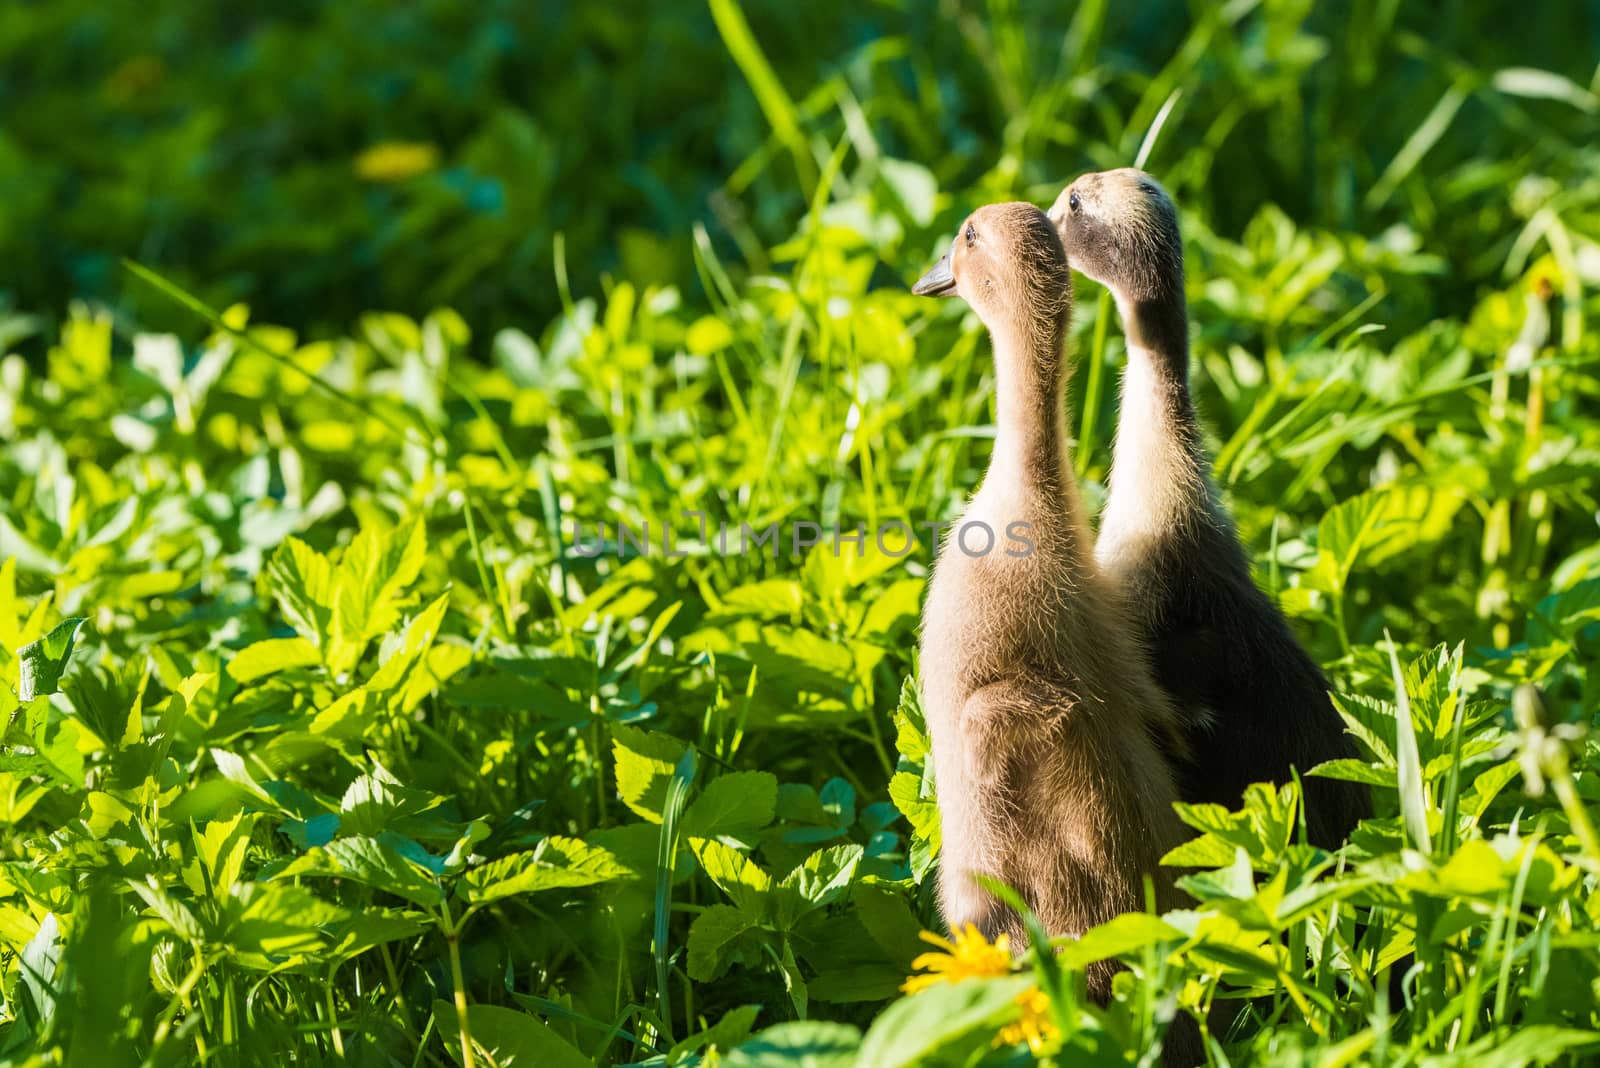 Two Little domestic gray duckling sitting in green grass.